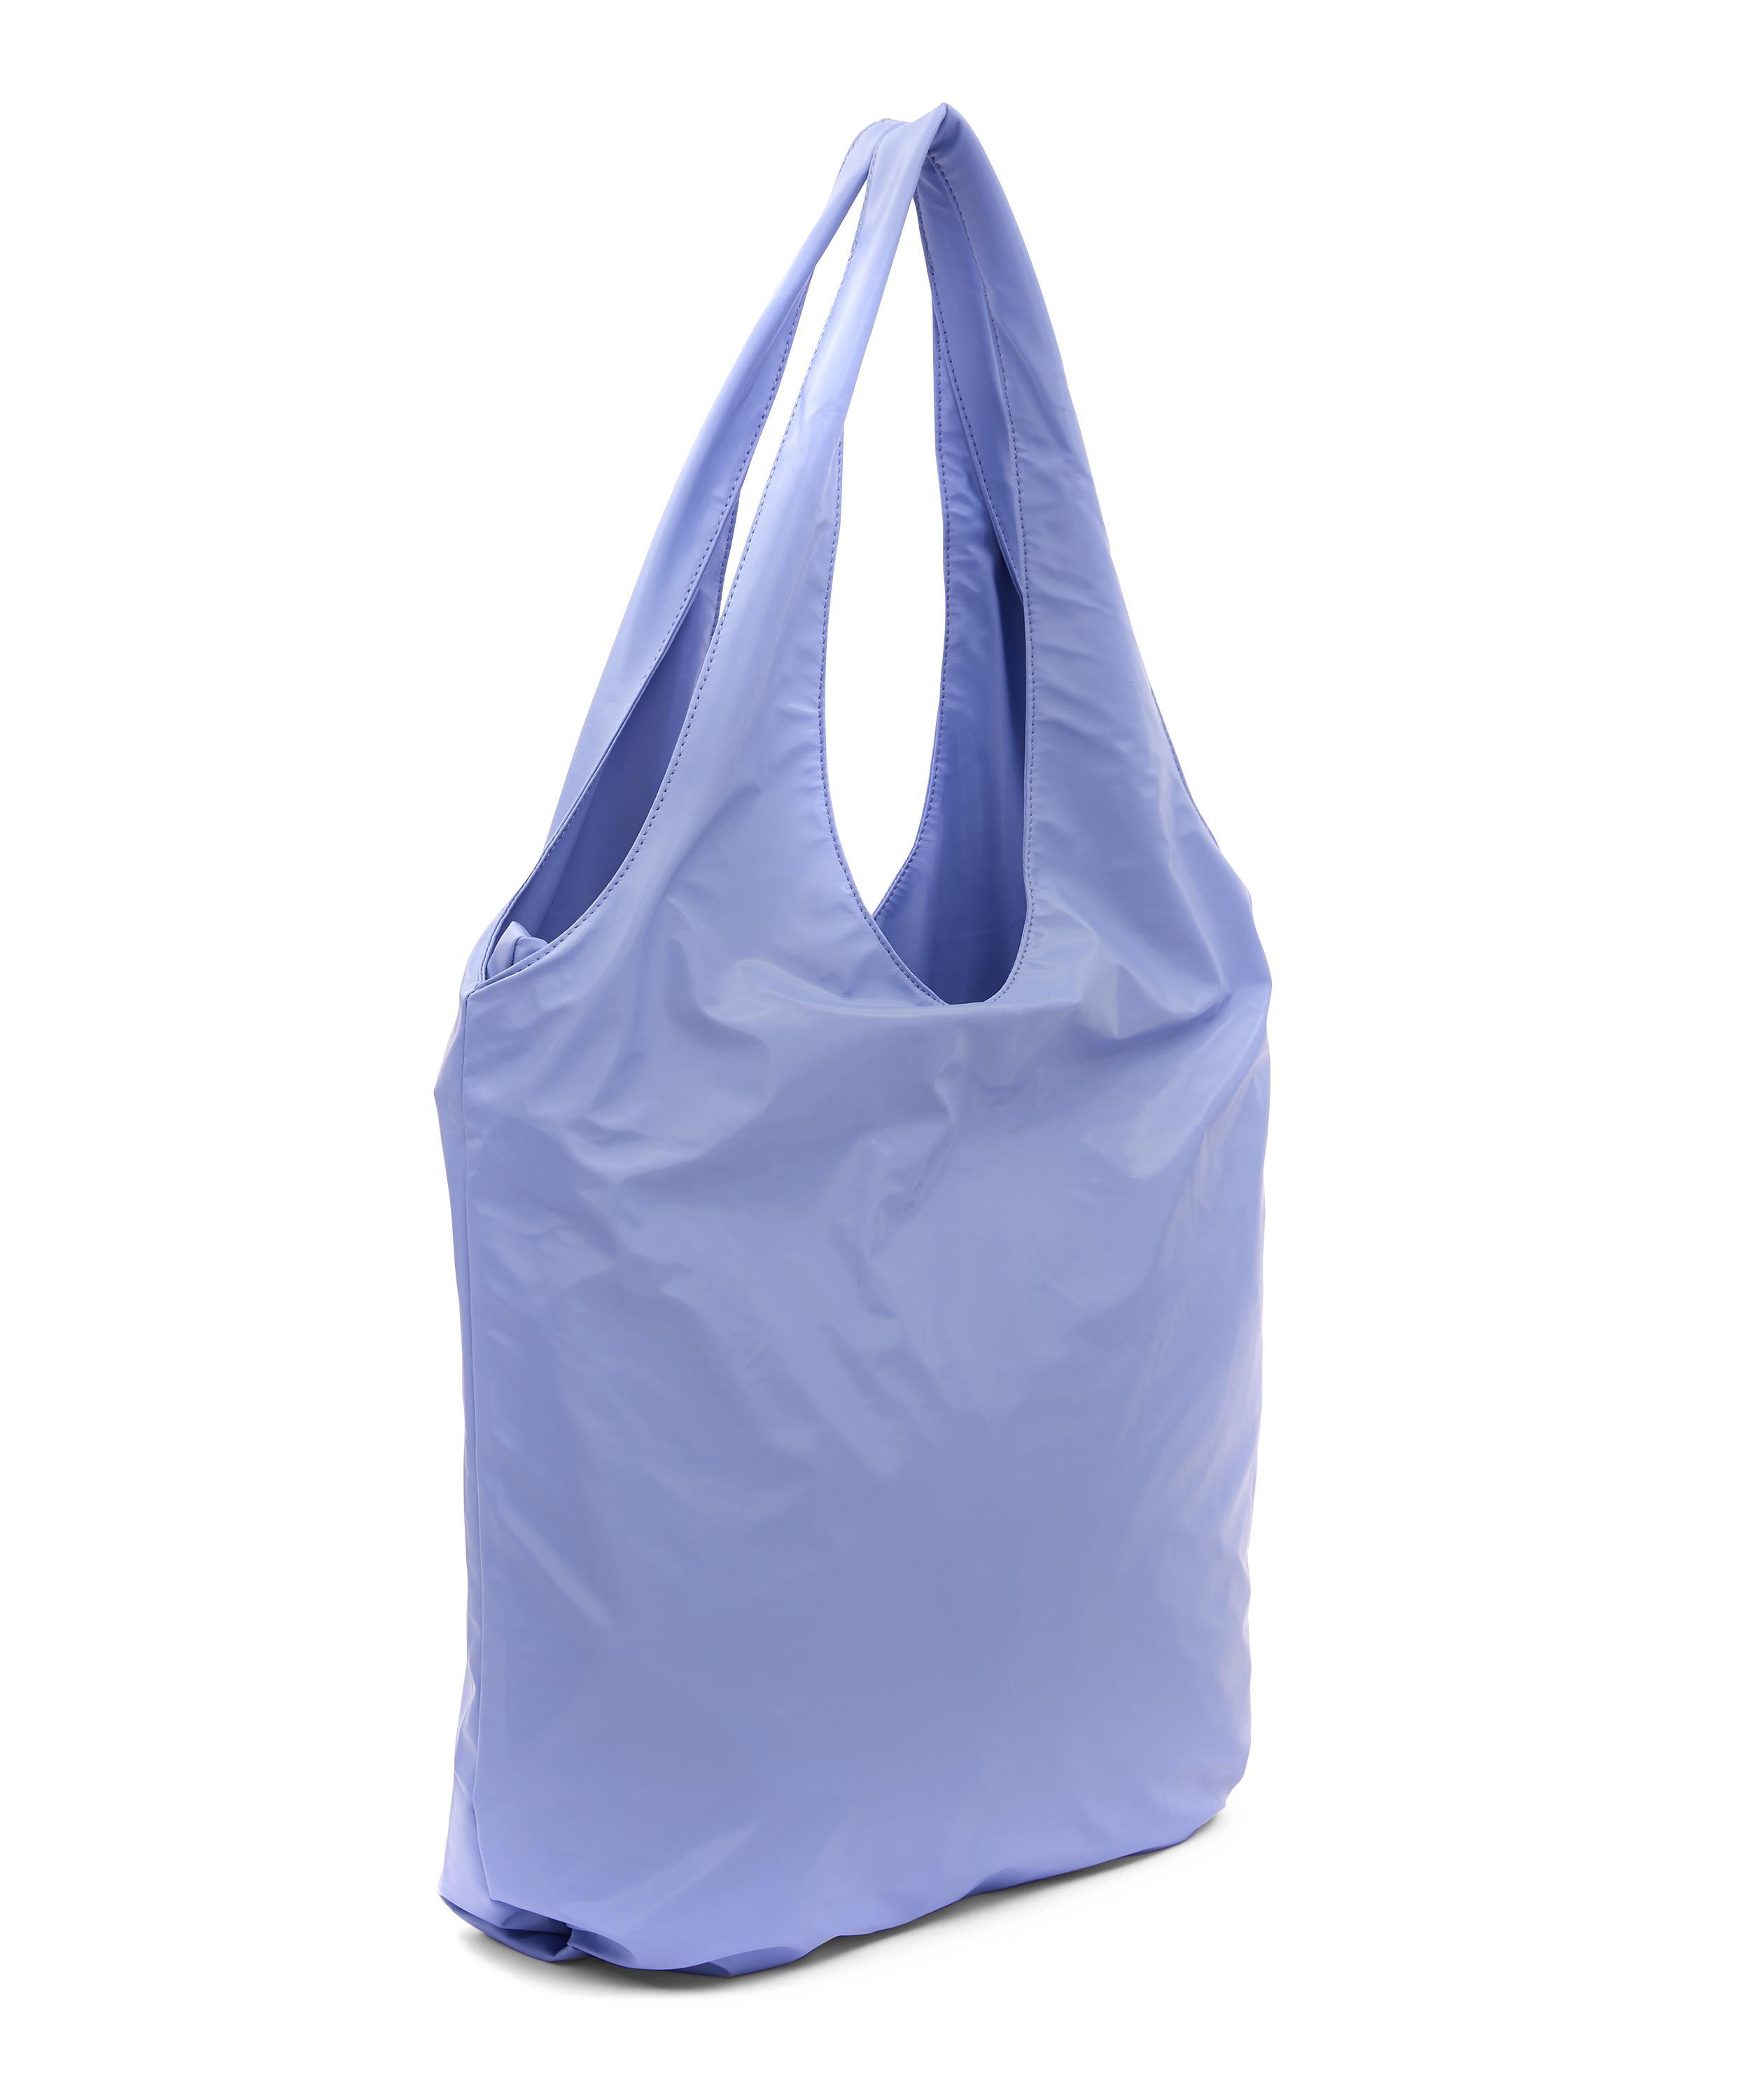 Rains Synthetic Large City Shopper Bag in Blue - Lyst